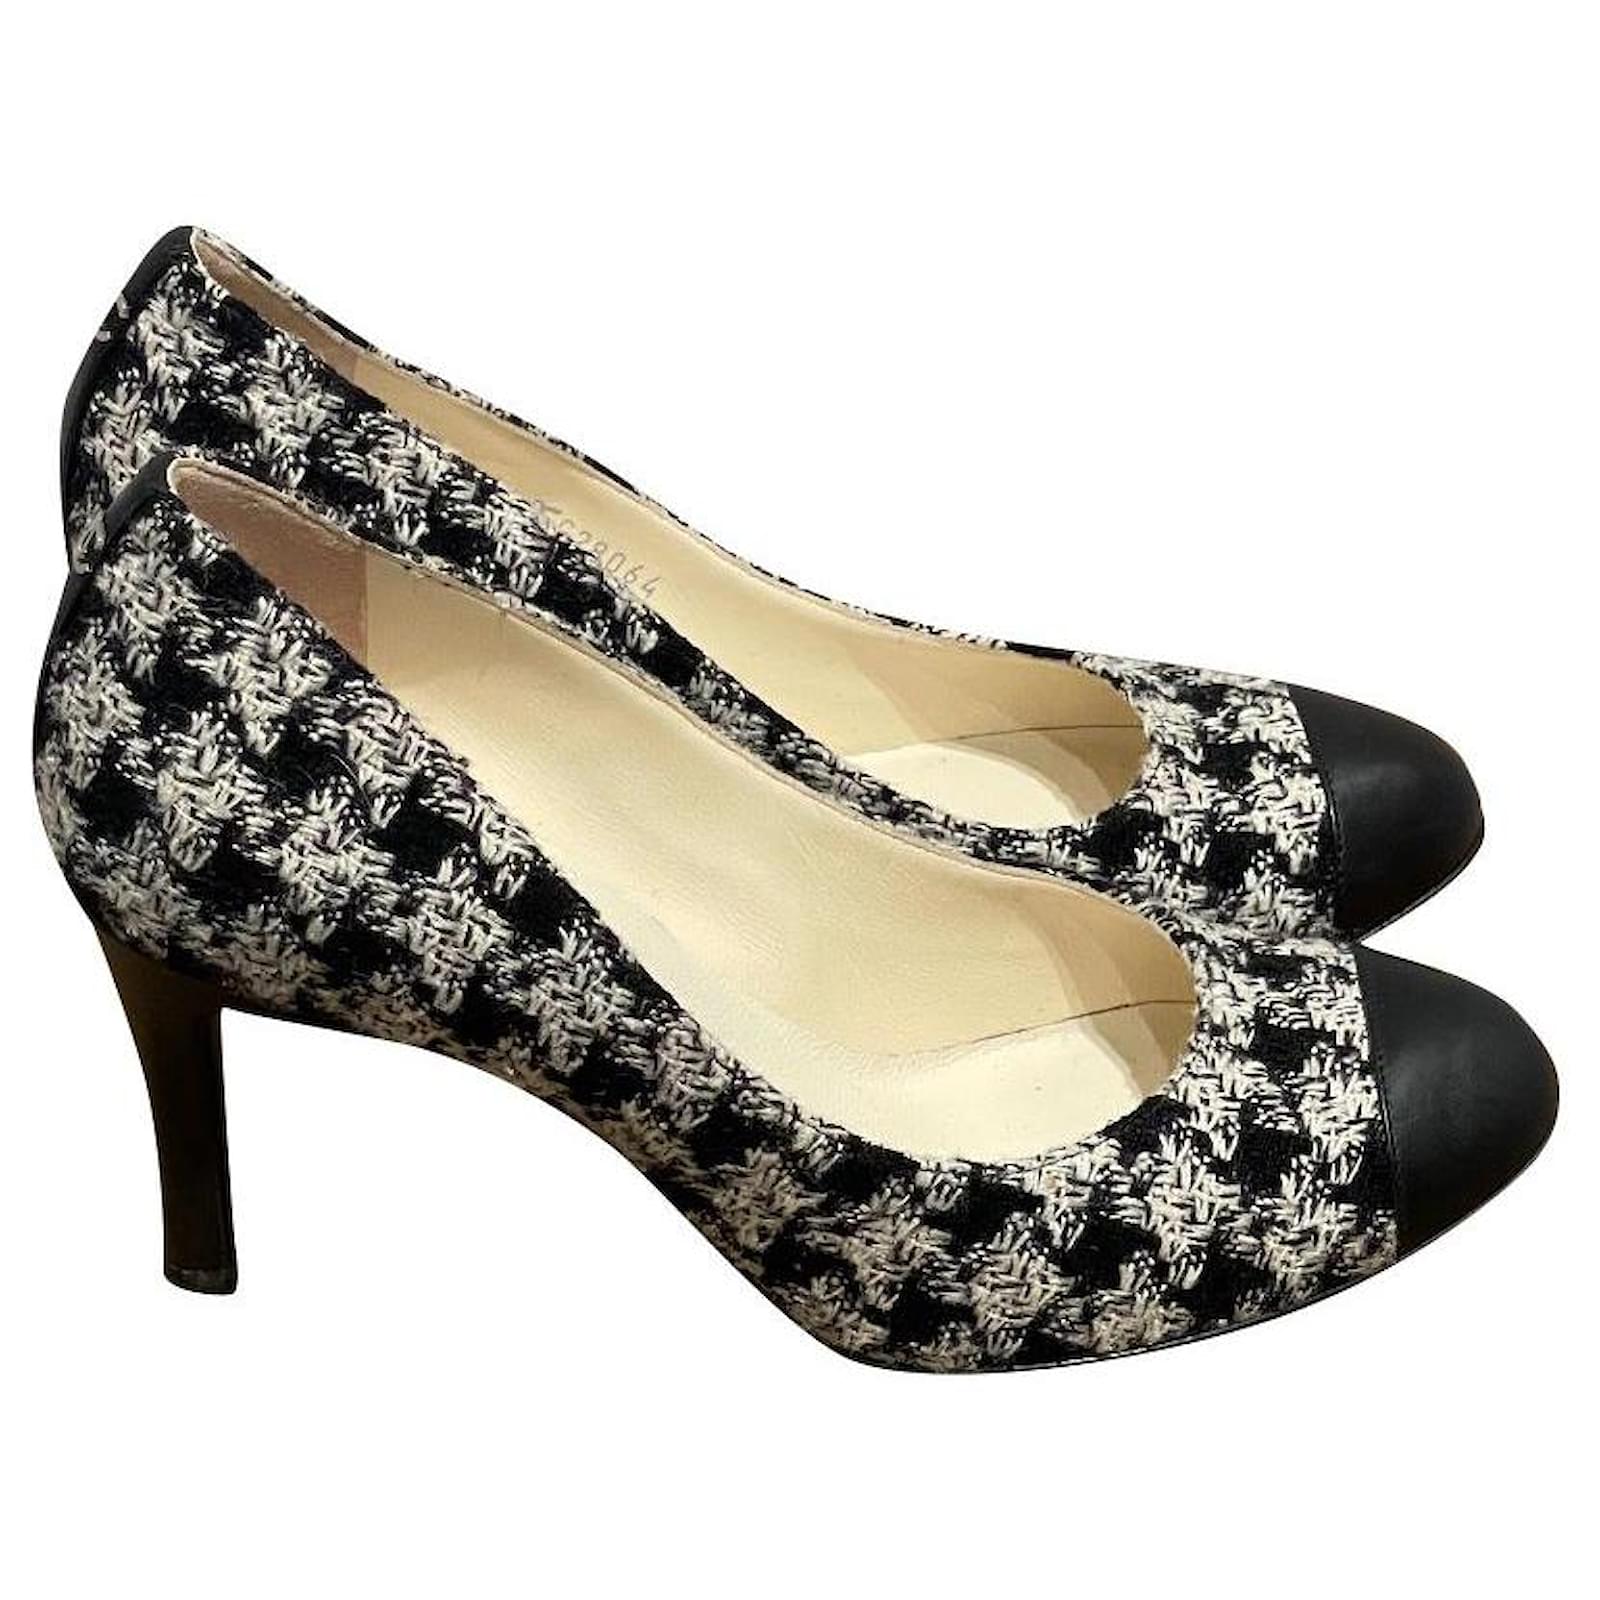 CHANEL, Shoes, Chanel Slingback Pumps Black And White Tweed